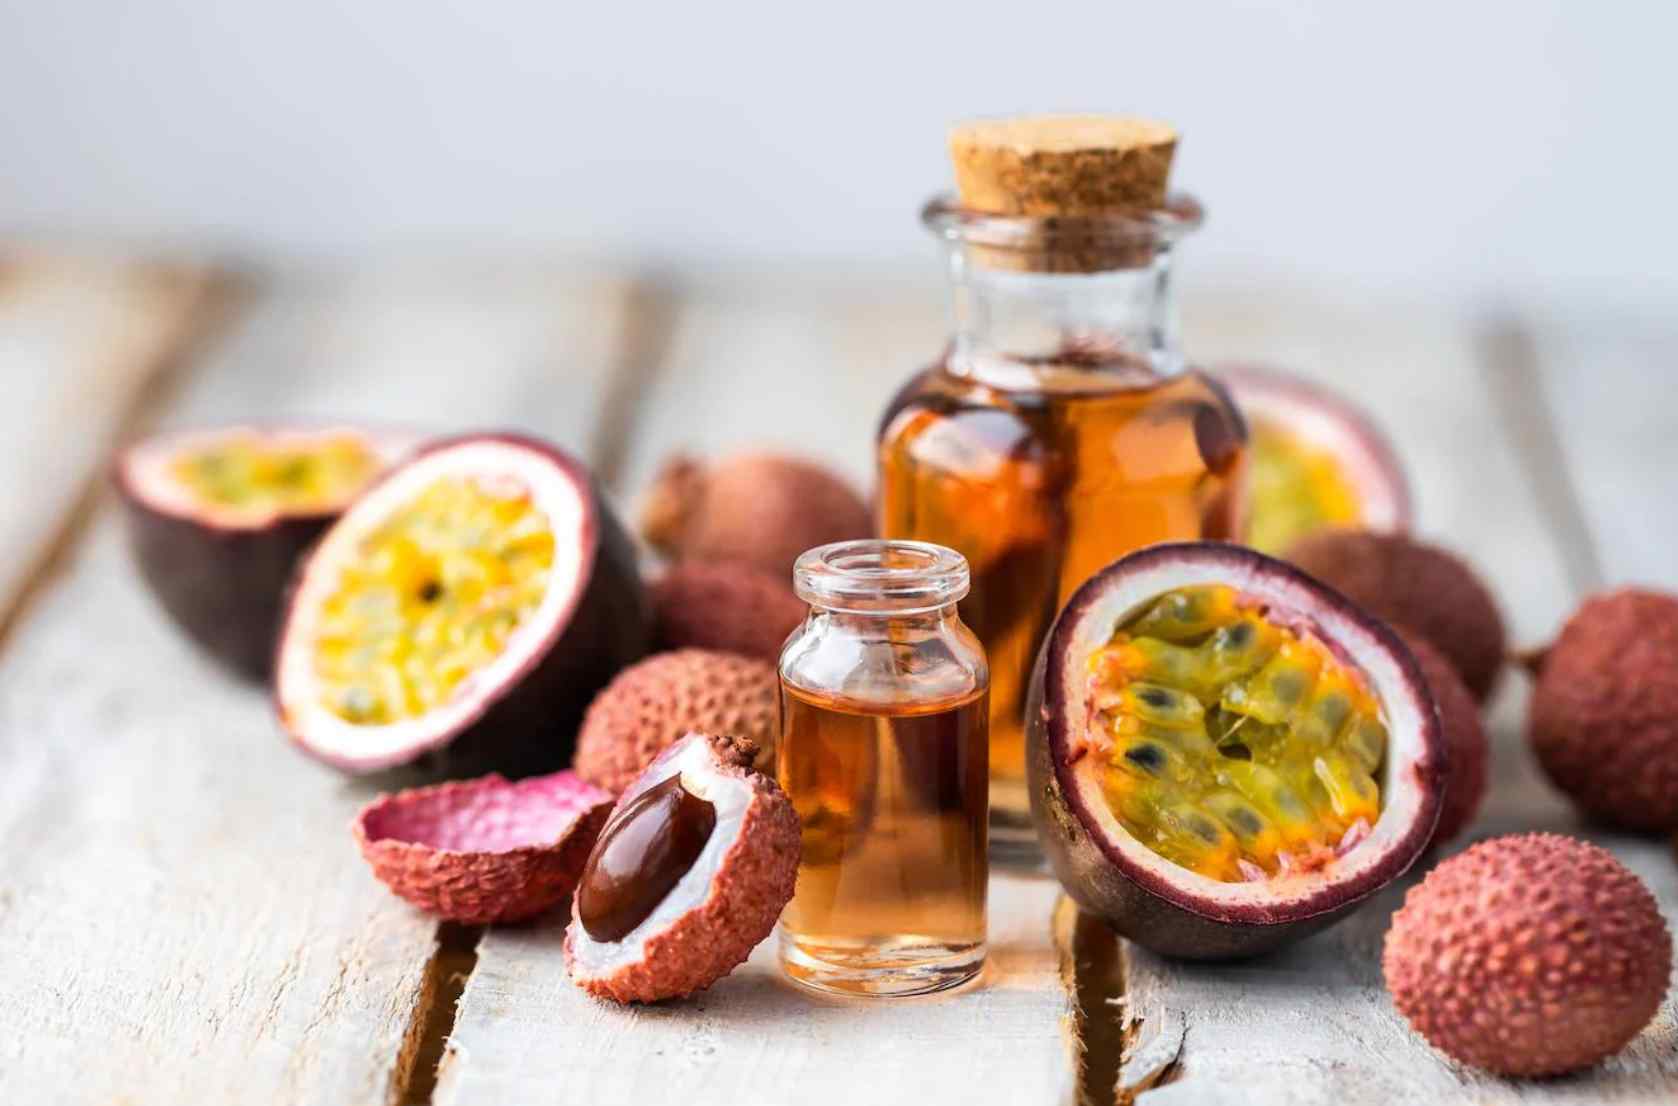 The Passion fruit seed oil is a natural oil from passion fruit seeds.